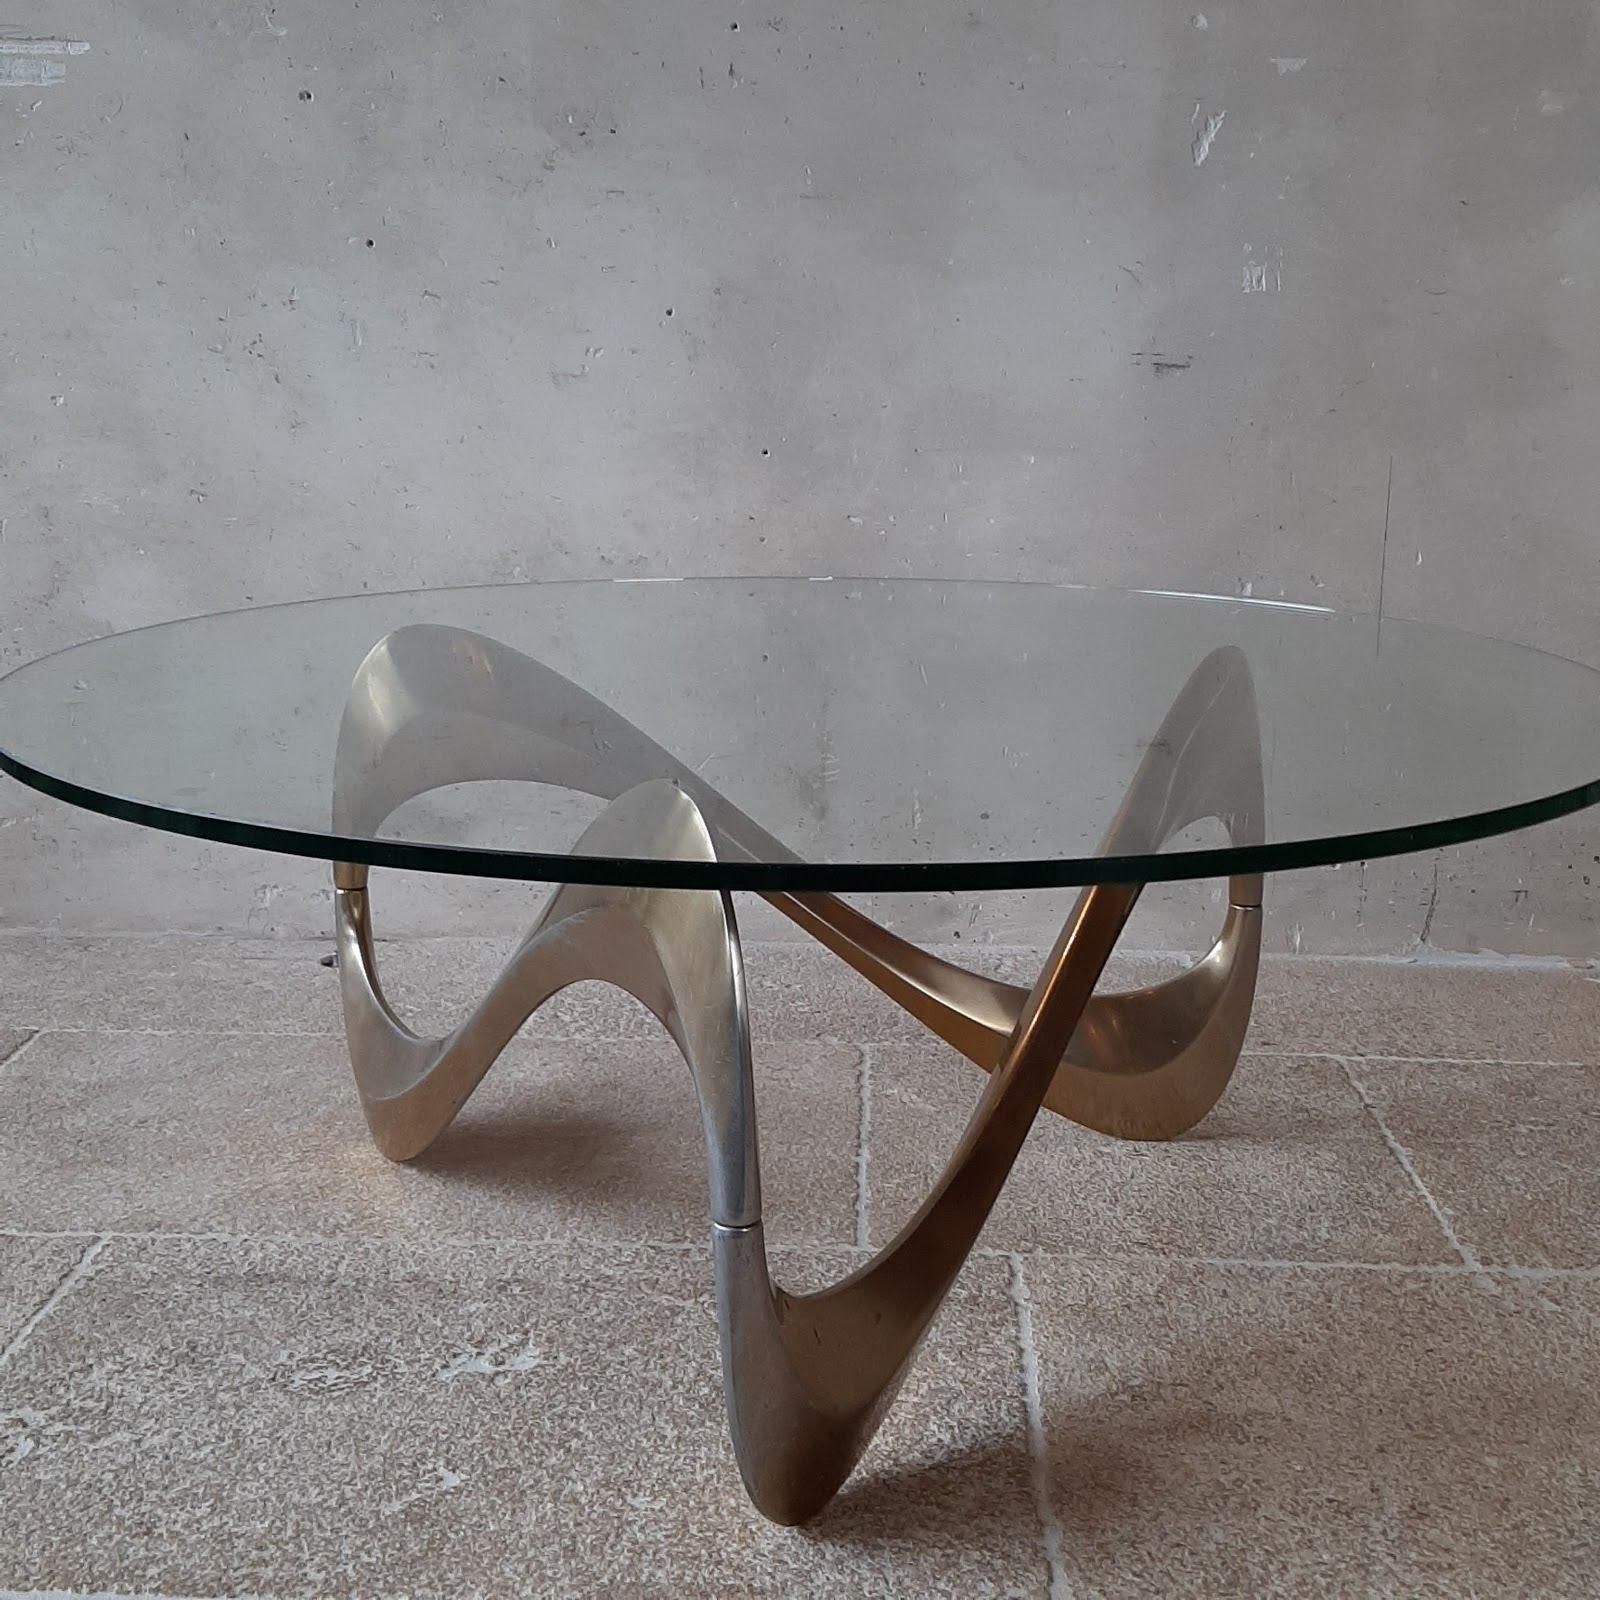 Midcentury coffee table by designer Knut Hesterberg from 1965. The organically shaped 'movement' in the aluminum base is beautifully visible under the large round glass top. This 1960s coffee table is super stylish in interiors such as Mid-Century